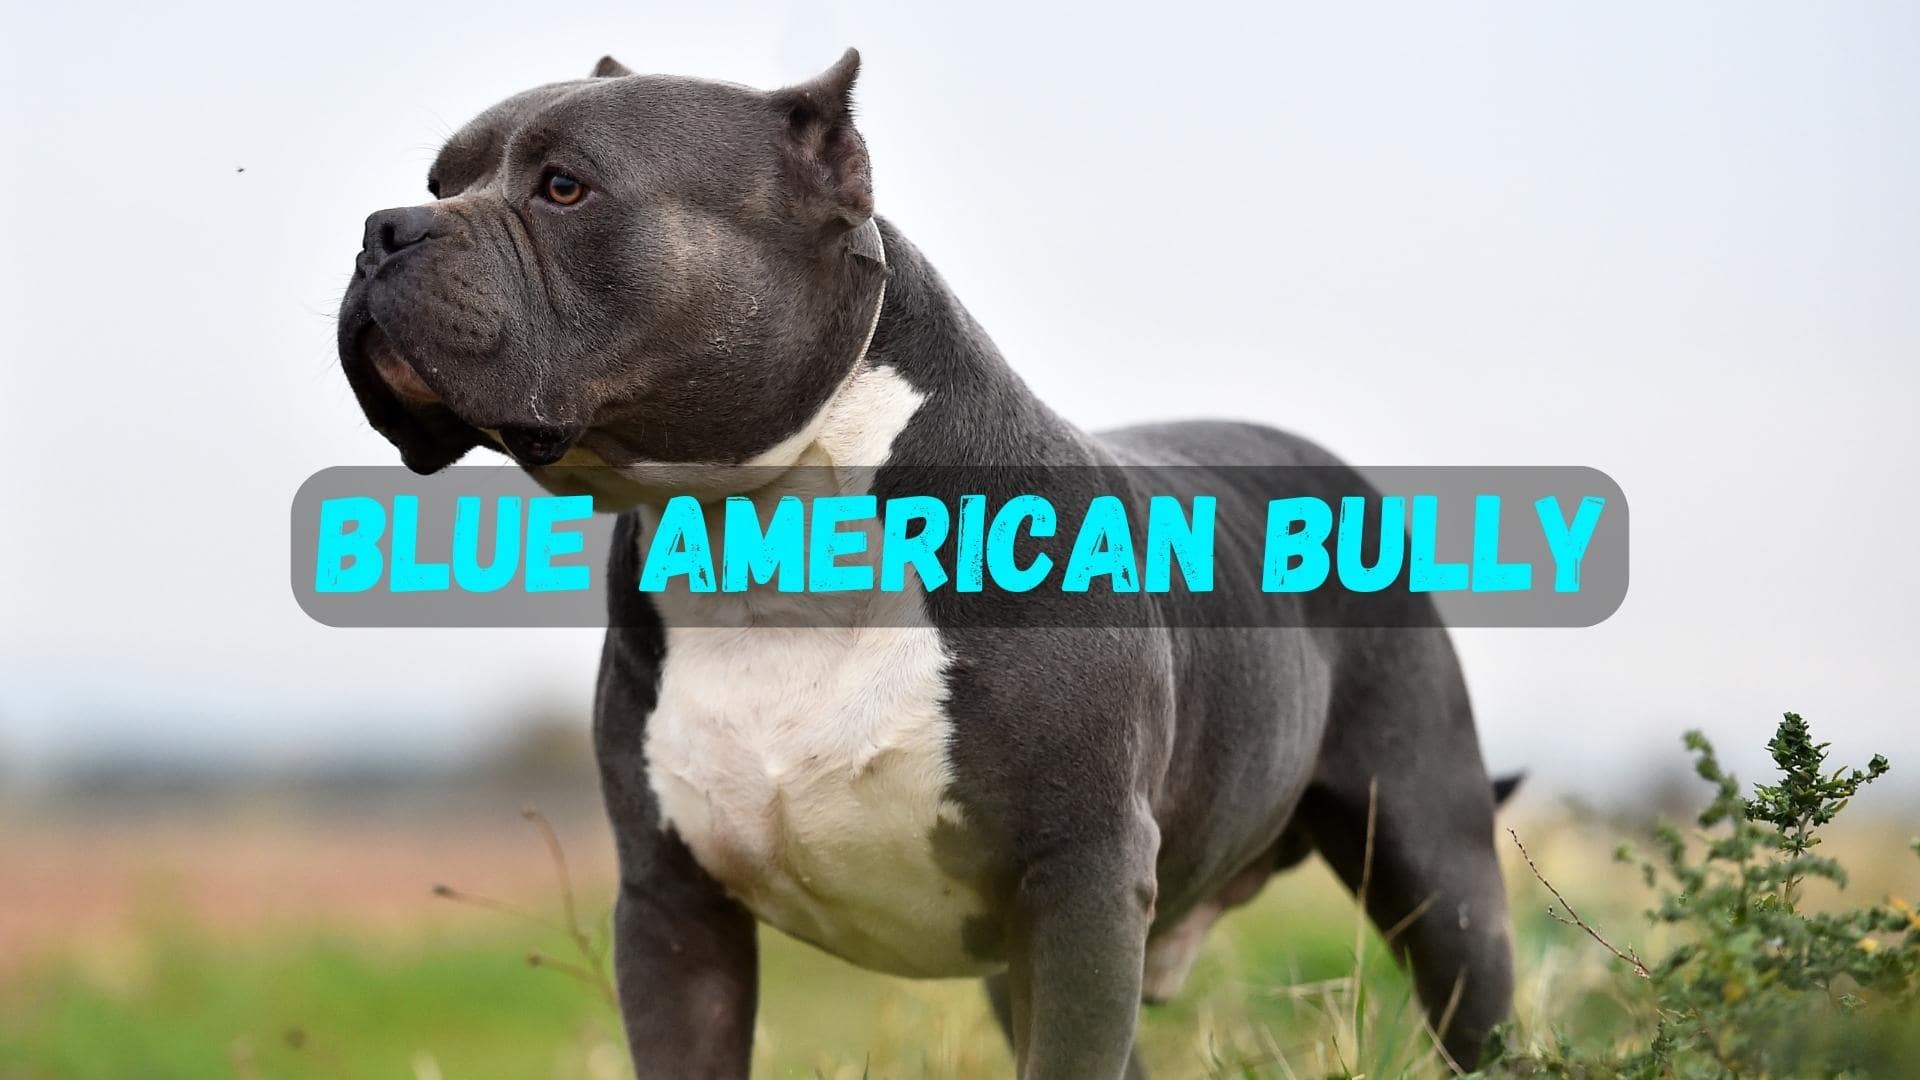 Blue American Bully: FAQs, Pictures, Cost, Care Guide & More!